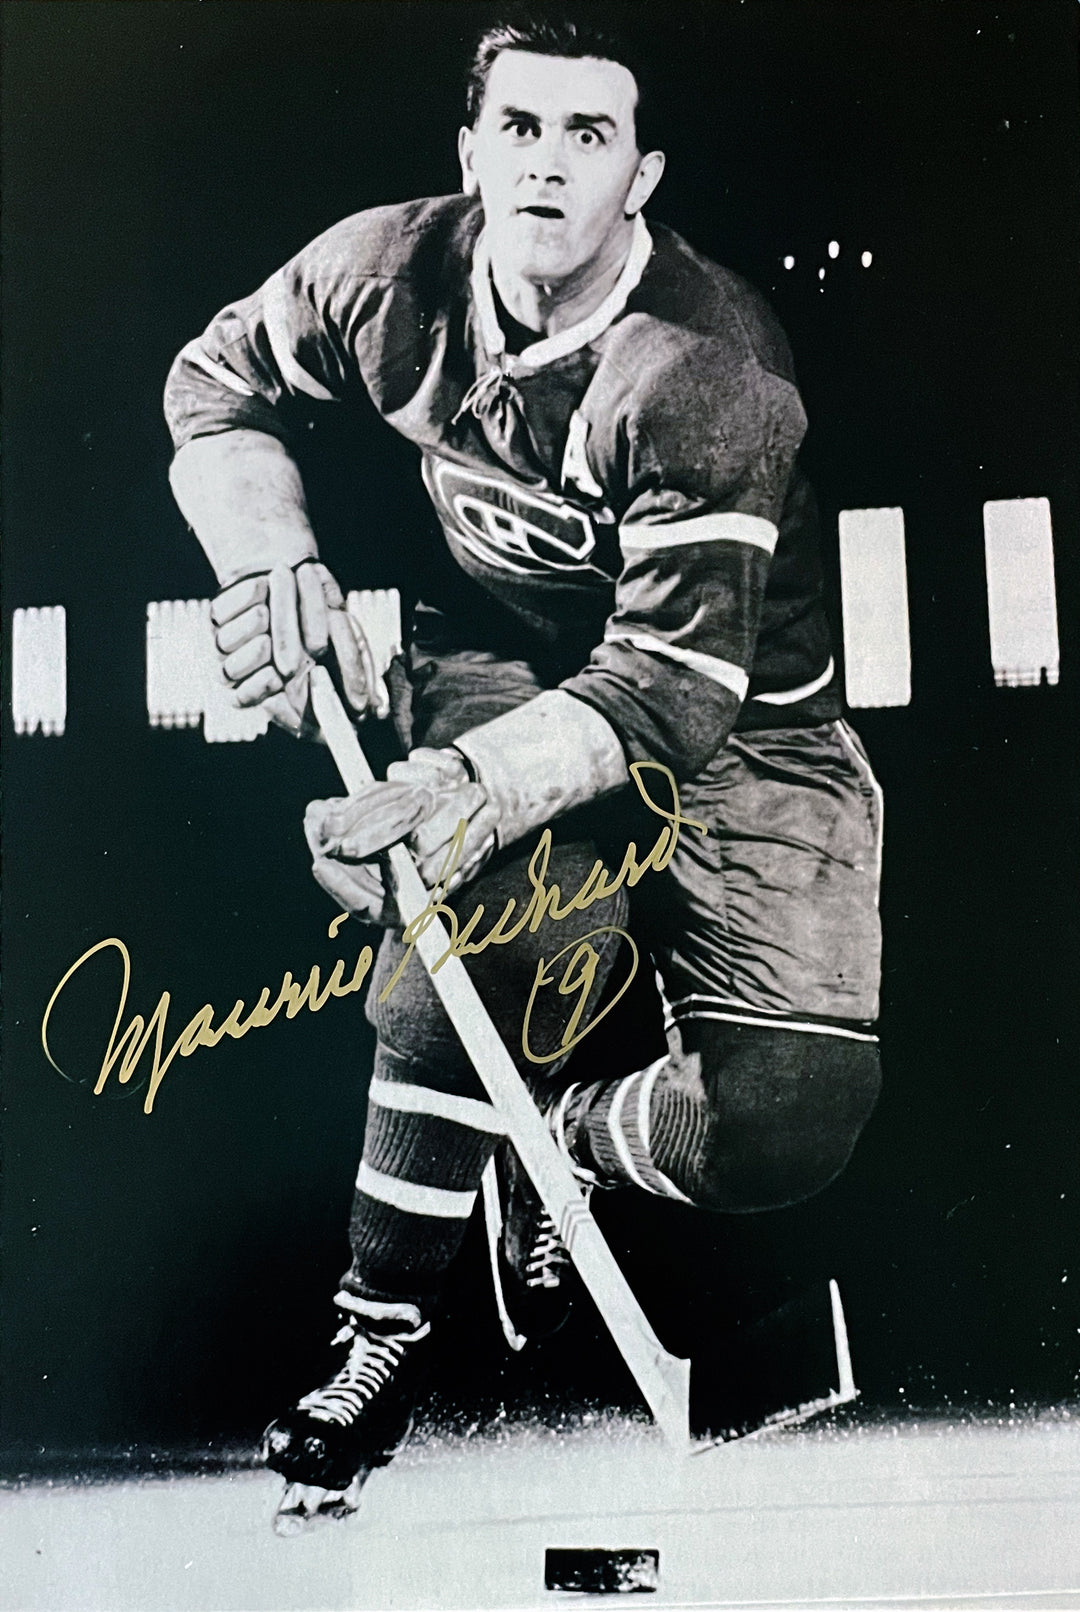 Autographed Maurice Richard 5X7 Gold Signature Sepia Photo Montreal Canadiens, Montreal Canadiens, NHL, Hockey, Autographed, Signed, AAHPH33210